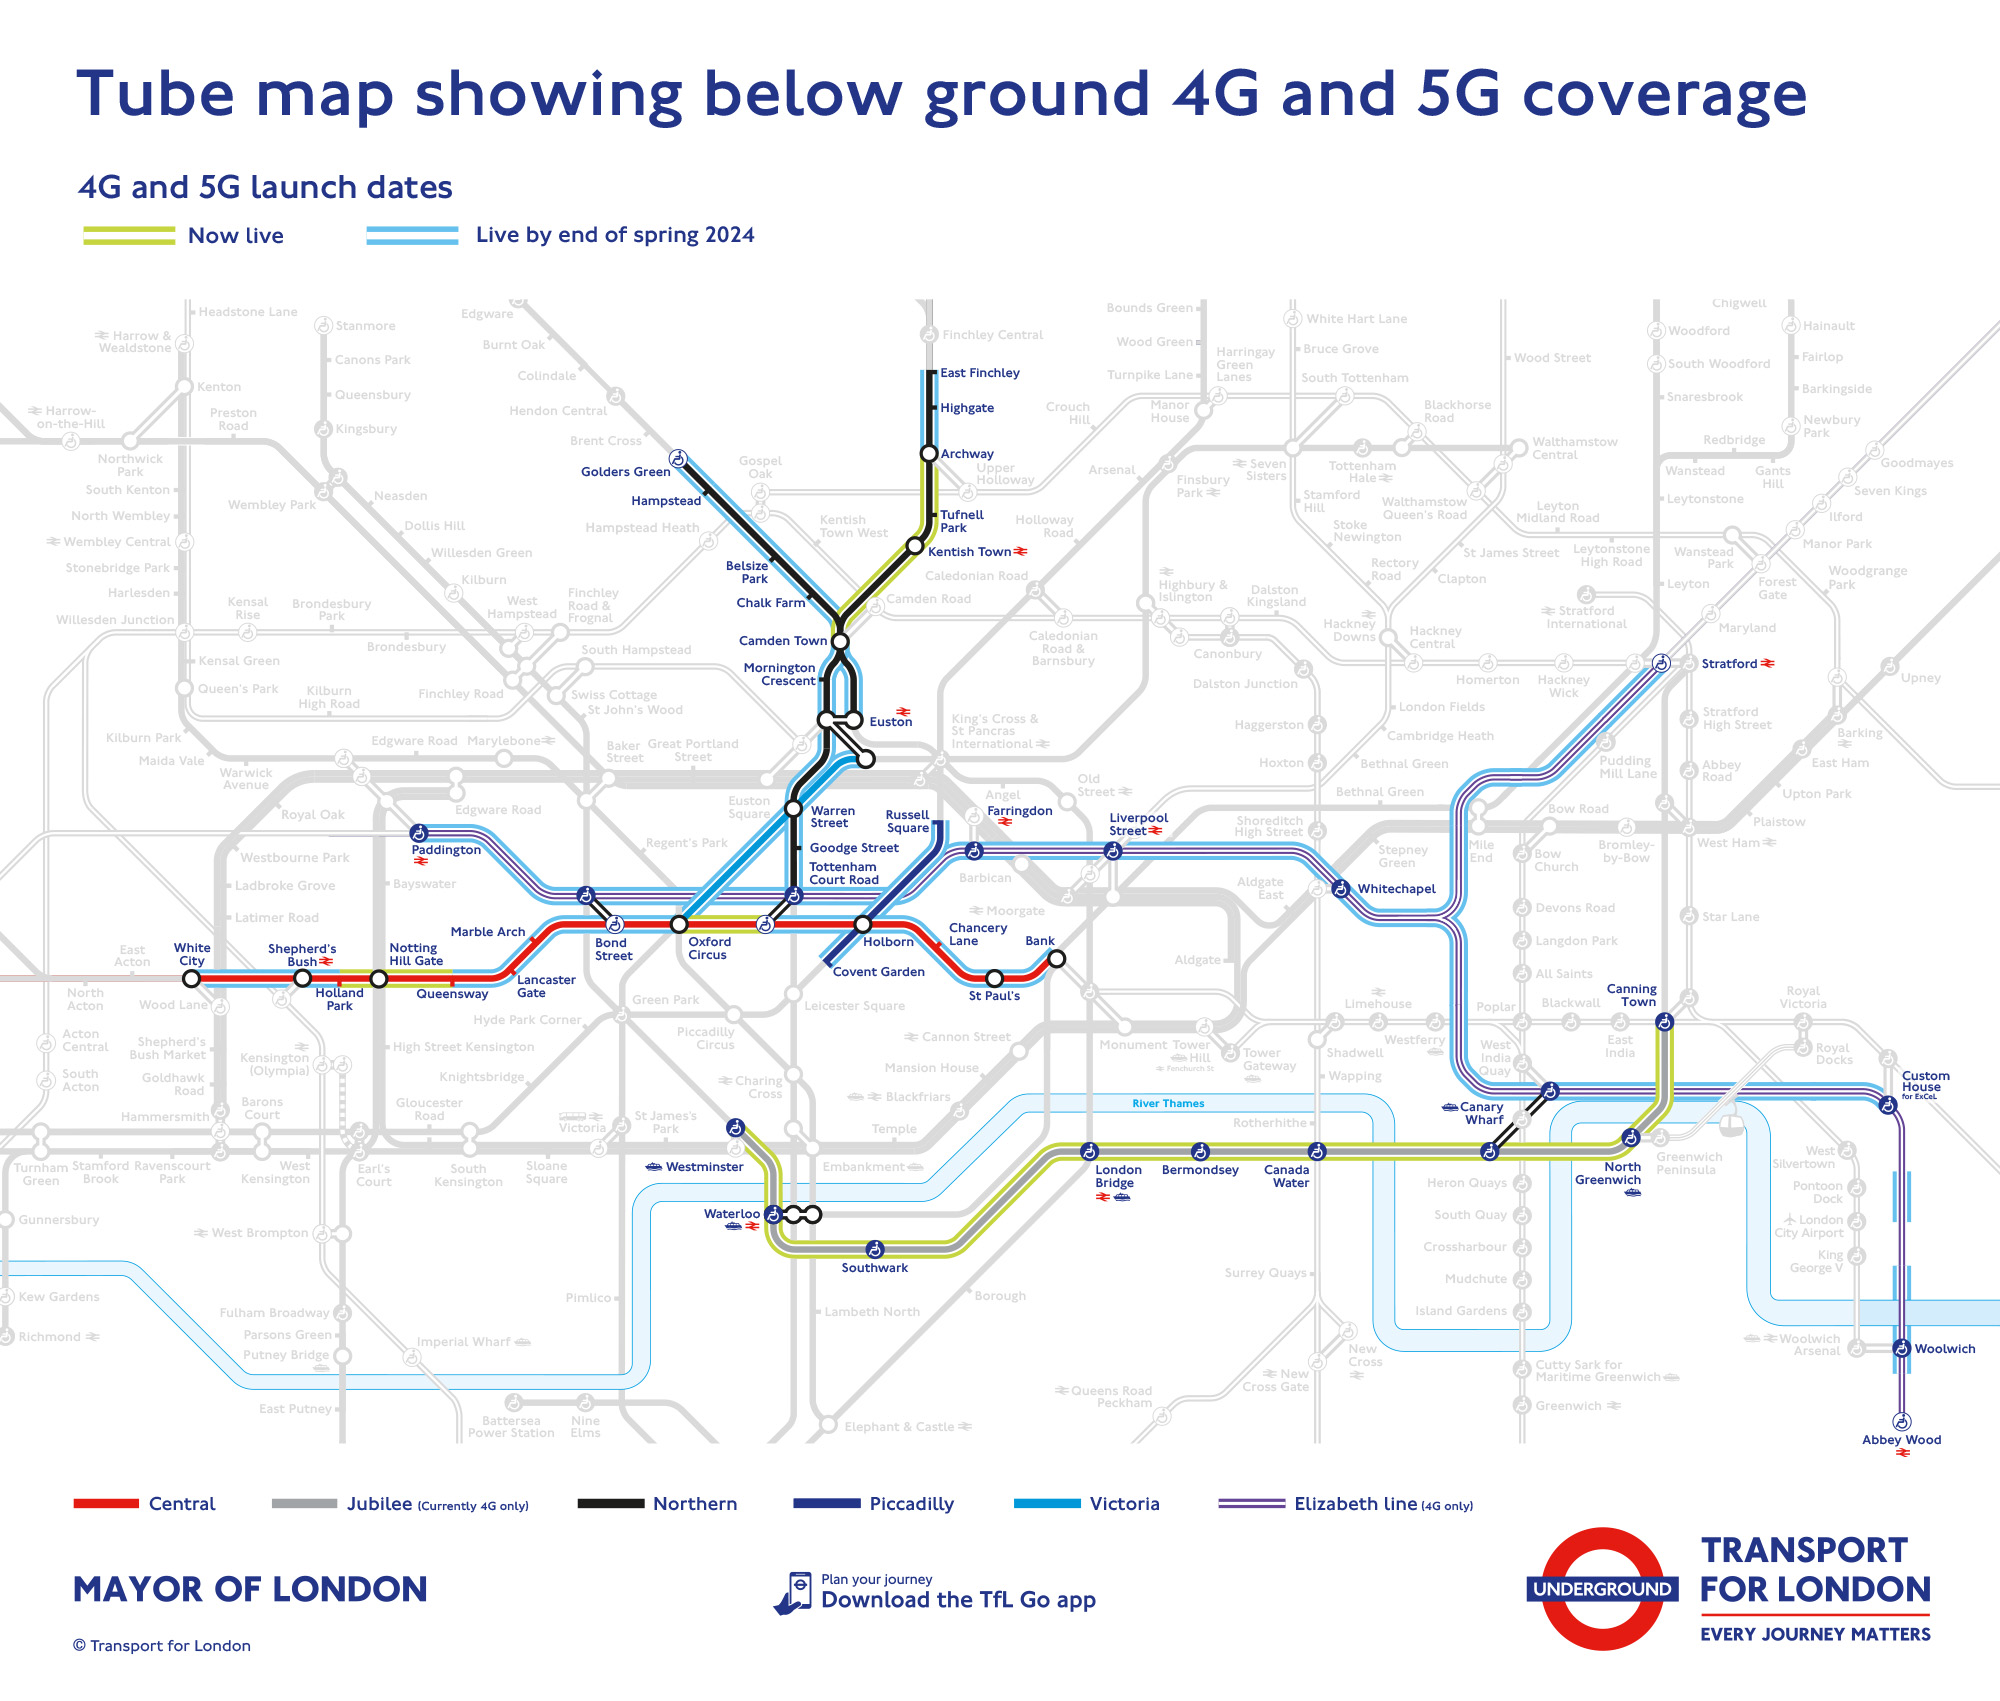 Mobile Coverage Tube map